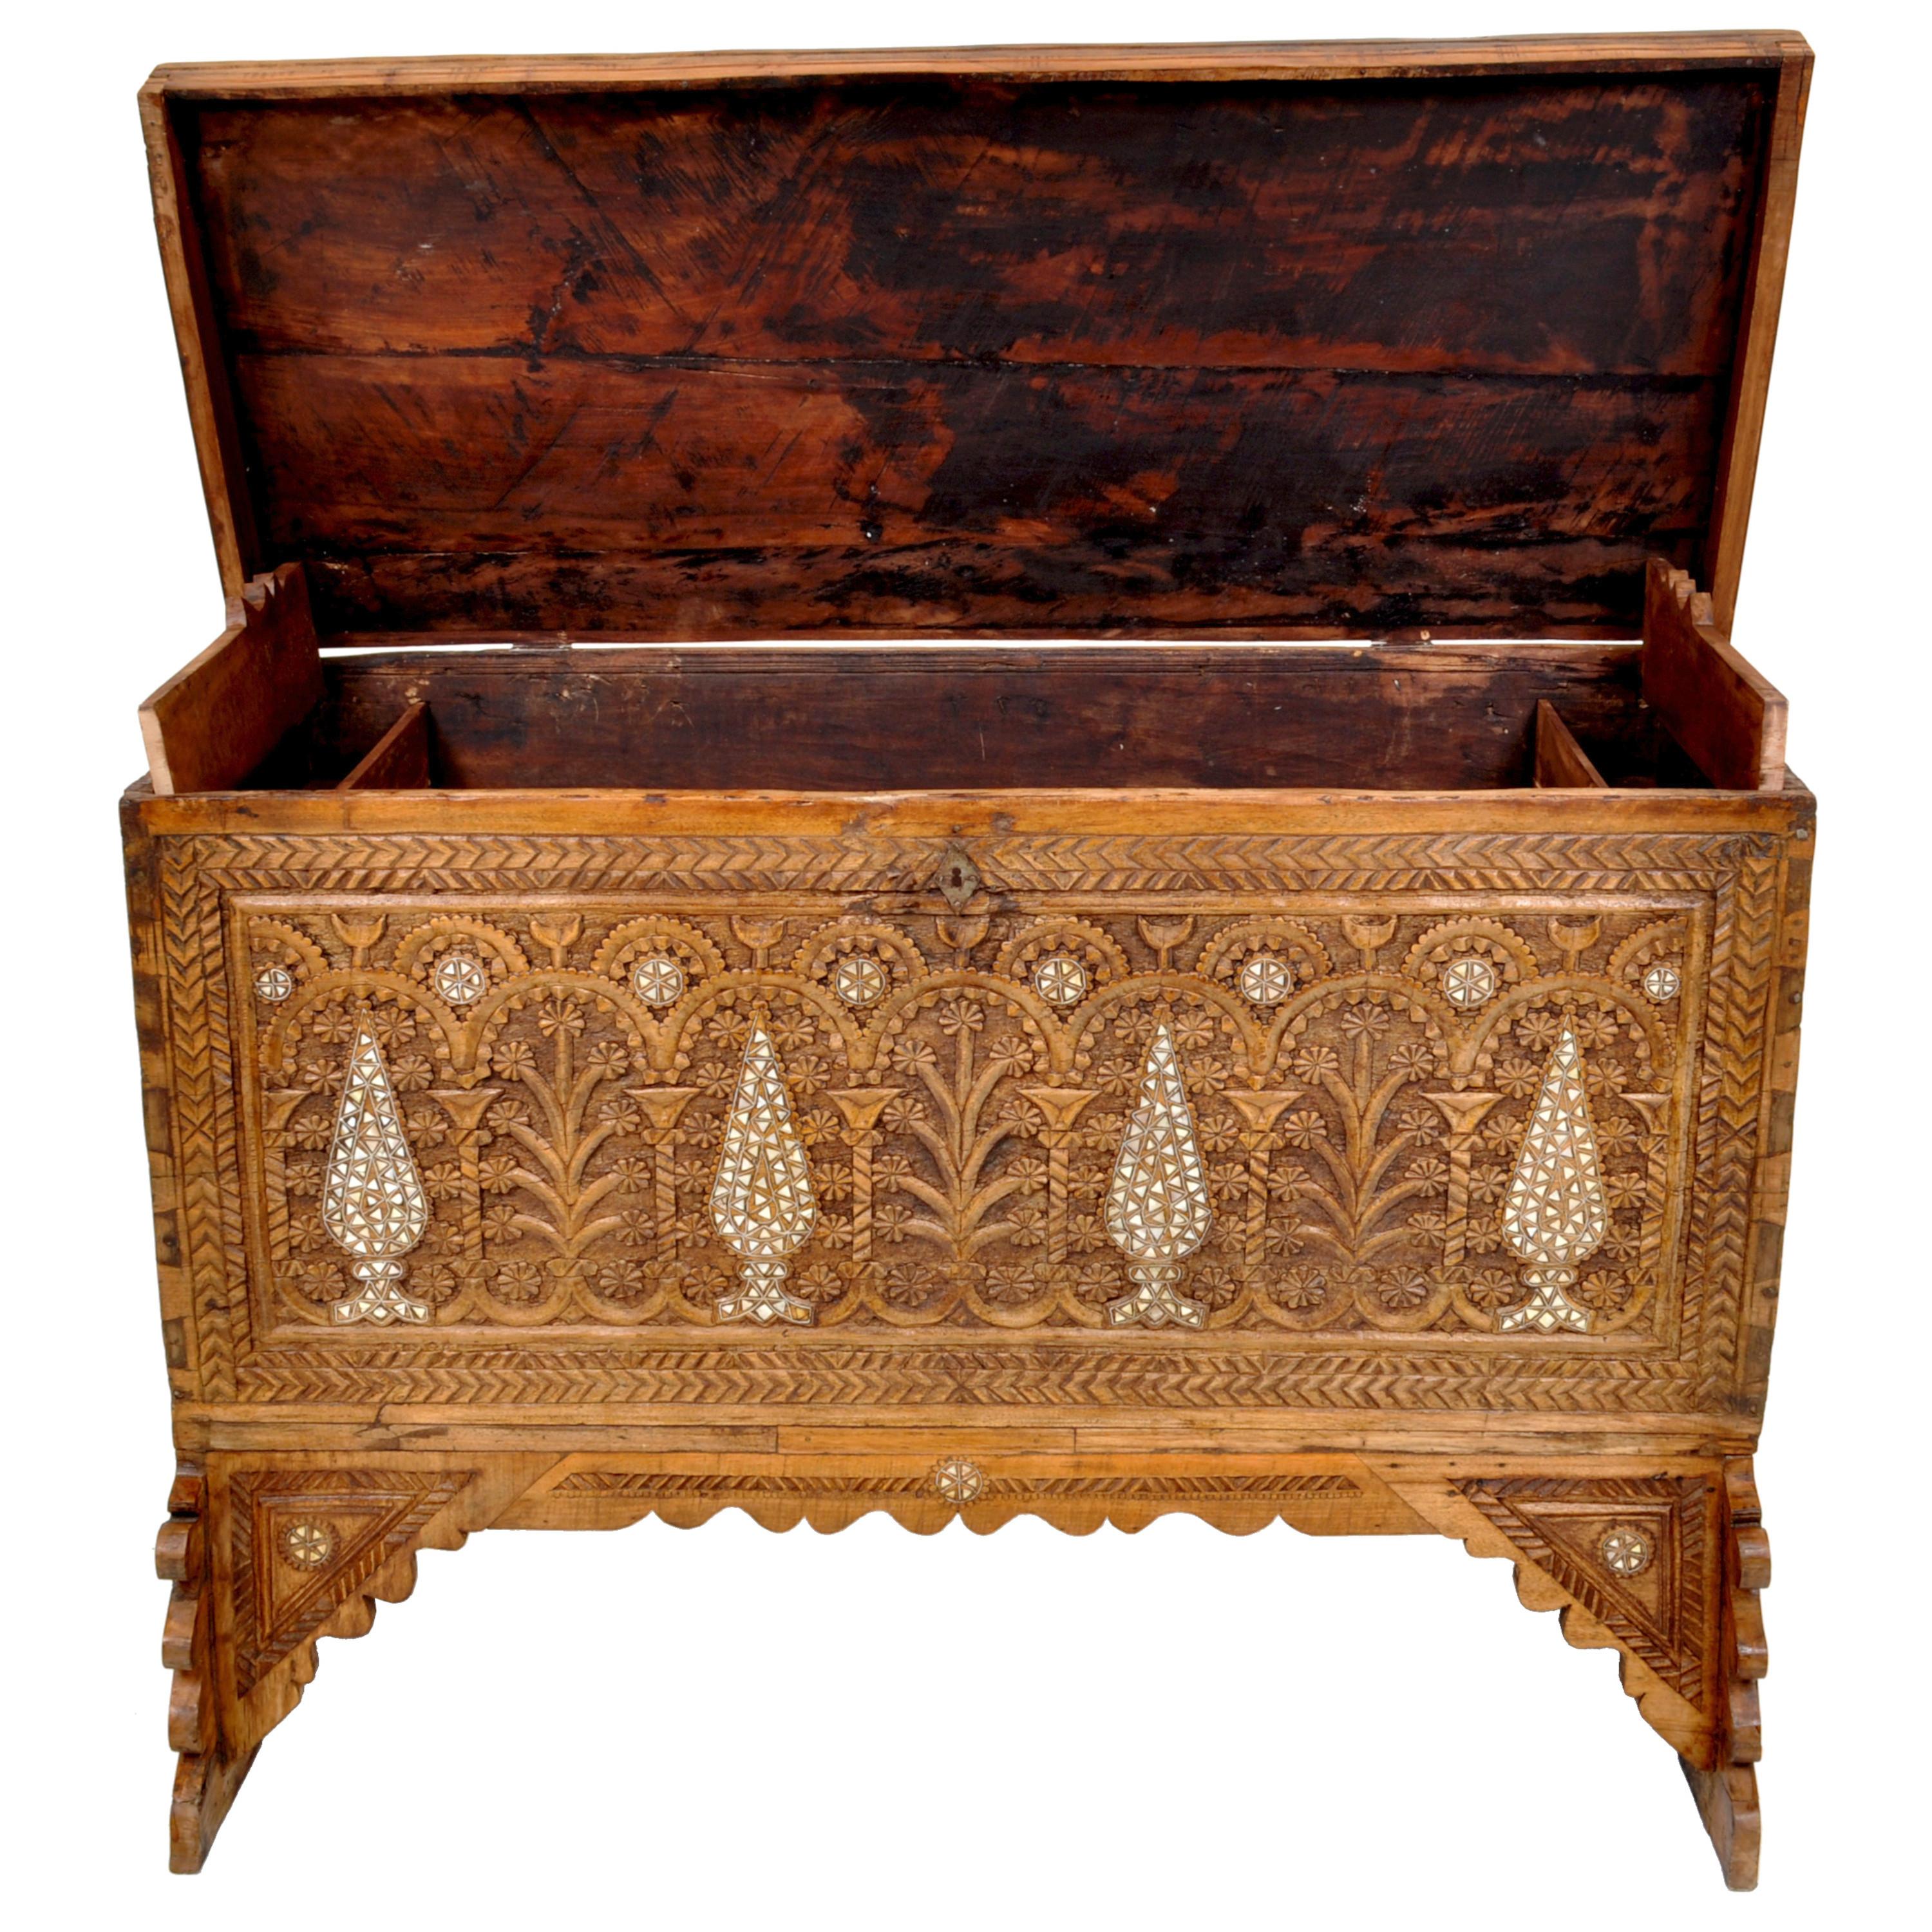 19th Century Antique Inlaid Mother of Pearl Syrian Marriage Dowry Chest Coffer Trunk, 1880